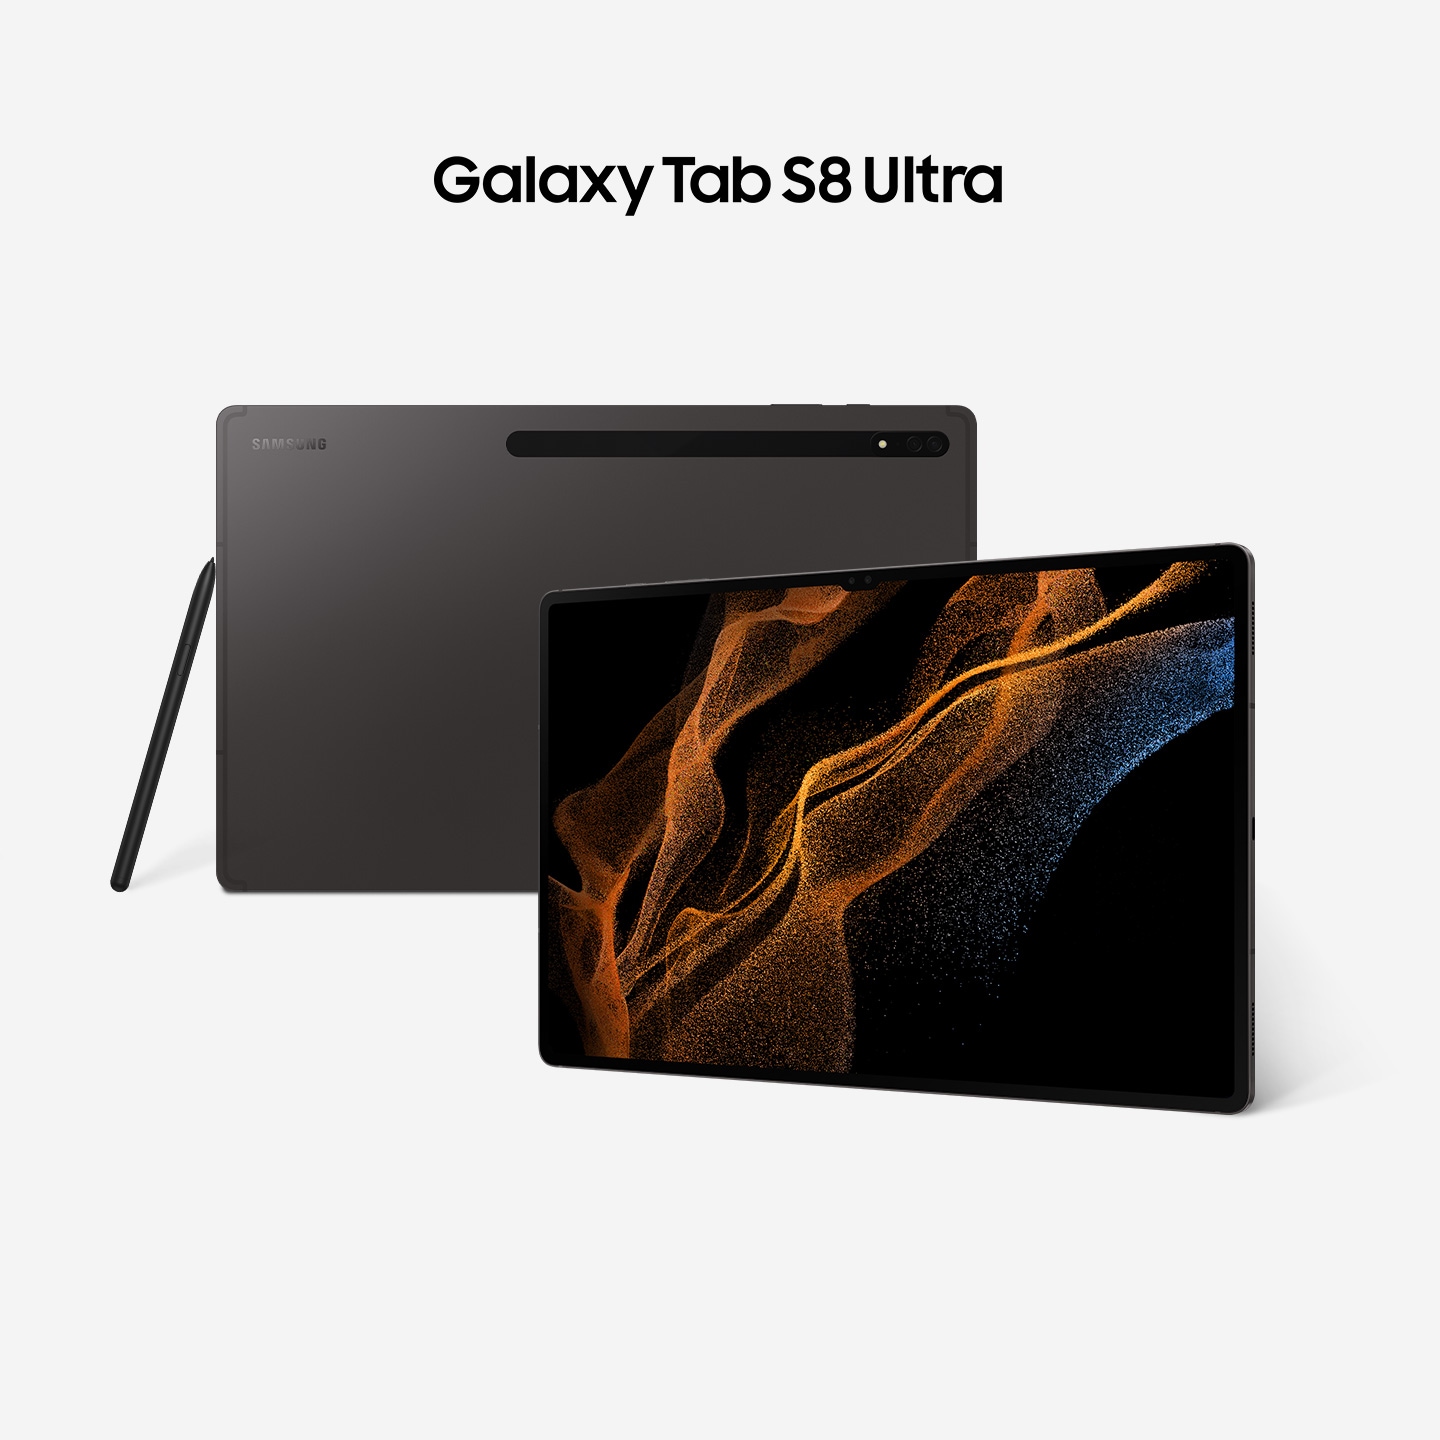 Samsung Galaxy Tab S8 series launched: Ultra specs, mega price